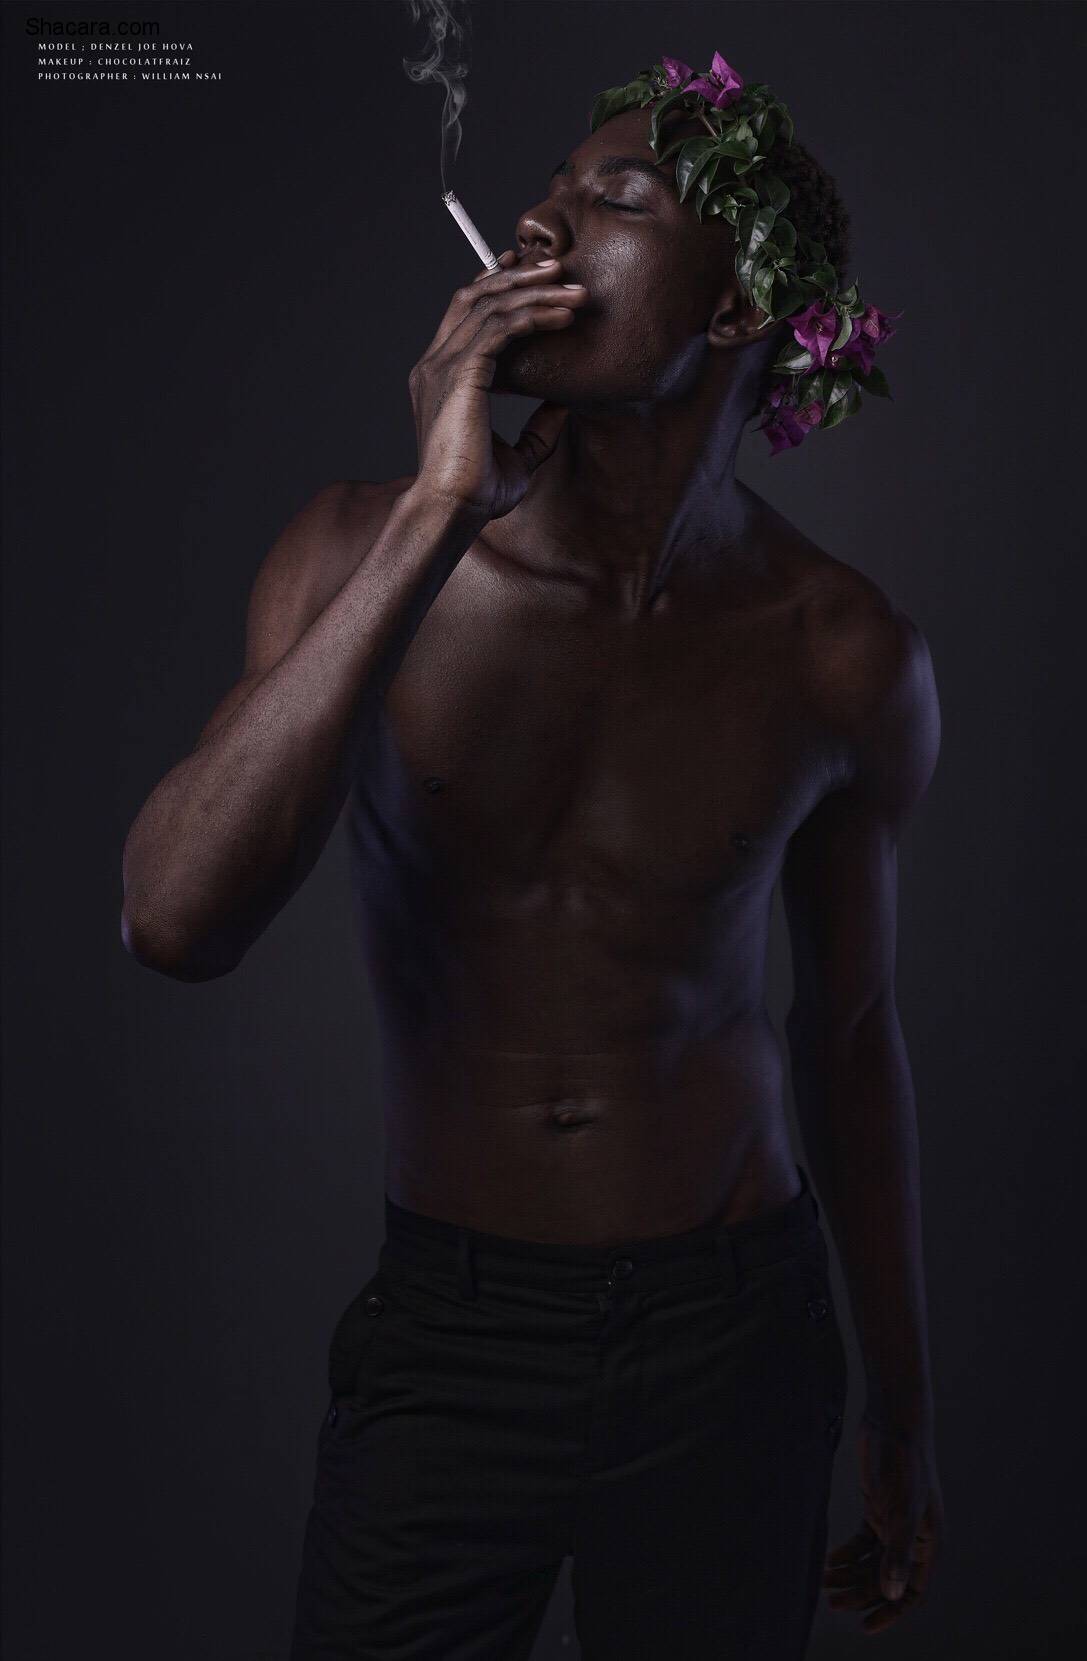 Hot Shots: The Day A Man Wore A Flower Crown; Shoot By William Nsai